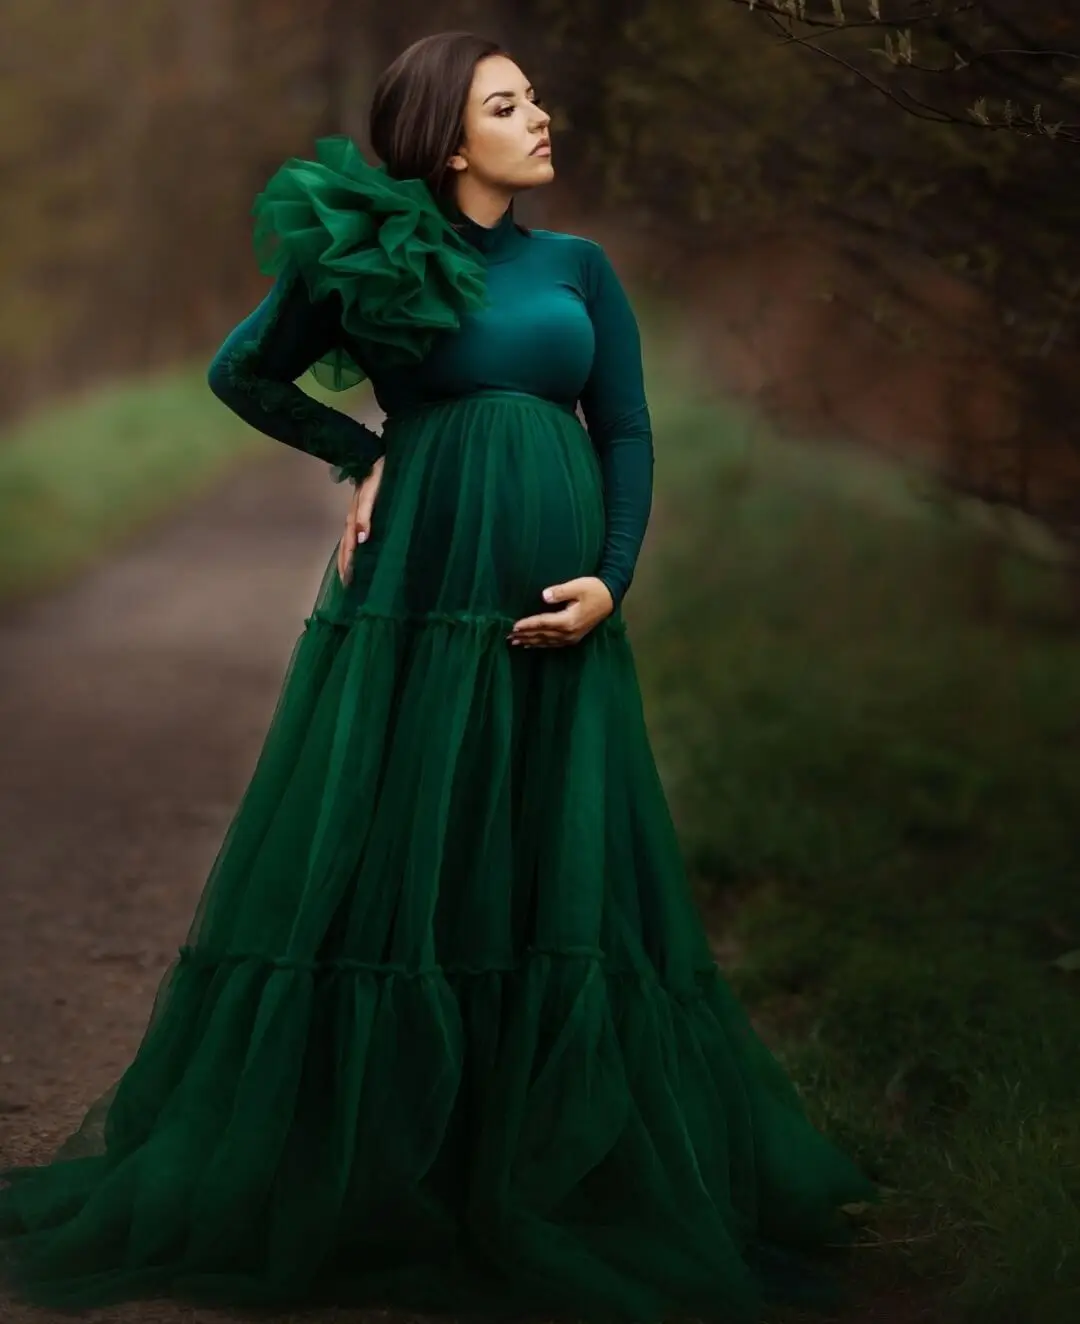 

Hunter Green Tulle Pregancy Maternity Dresses Long Sleeves High Neck Mixi Tulle Prop Ruffles Babyshower Gowns For Photo Shoot